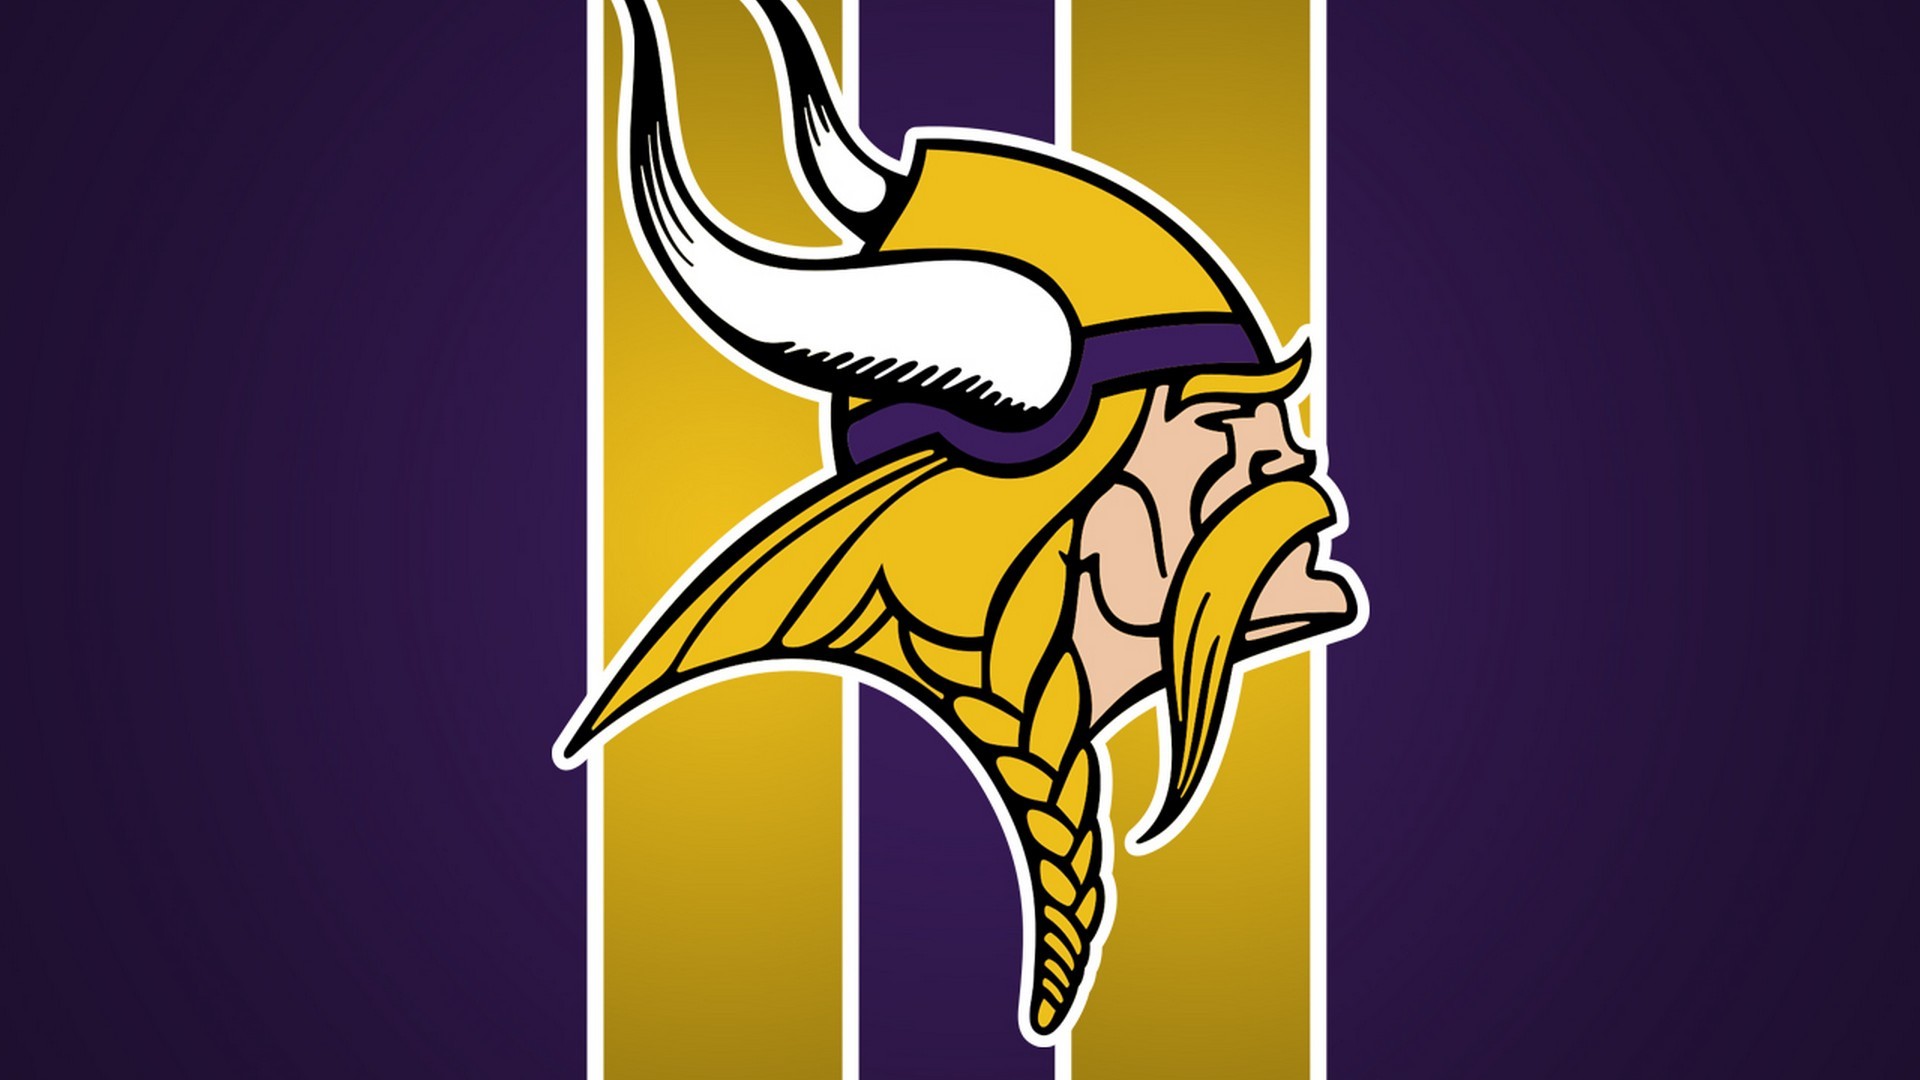 1920x1080 Minnesota Vikings Wallpaper with resolution  pixel. You can make  this wallpaper for your Mac